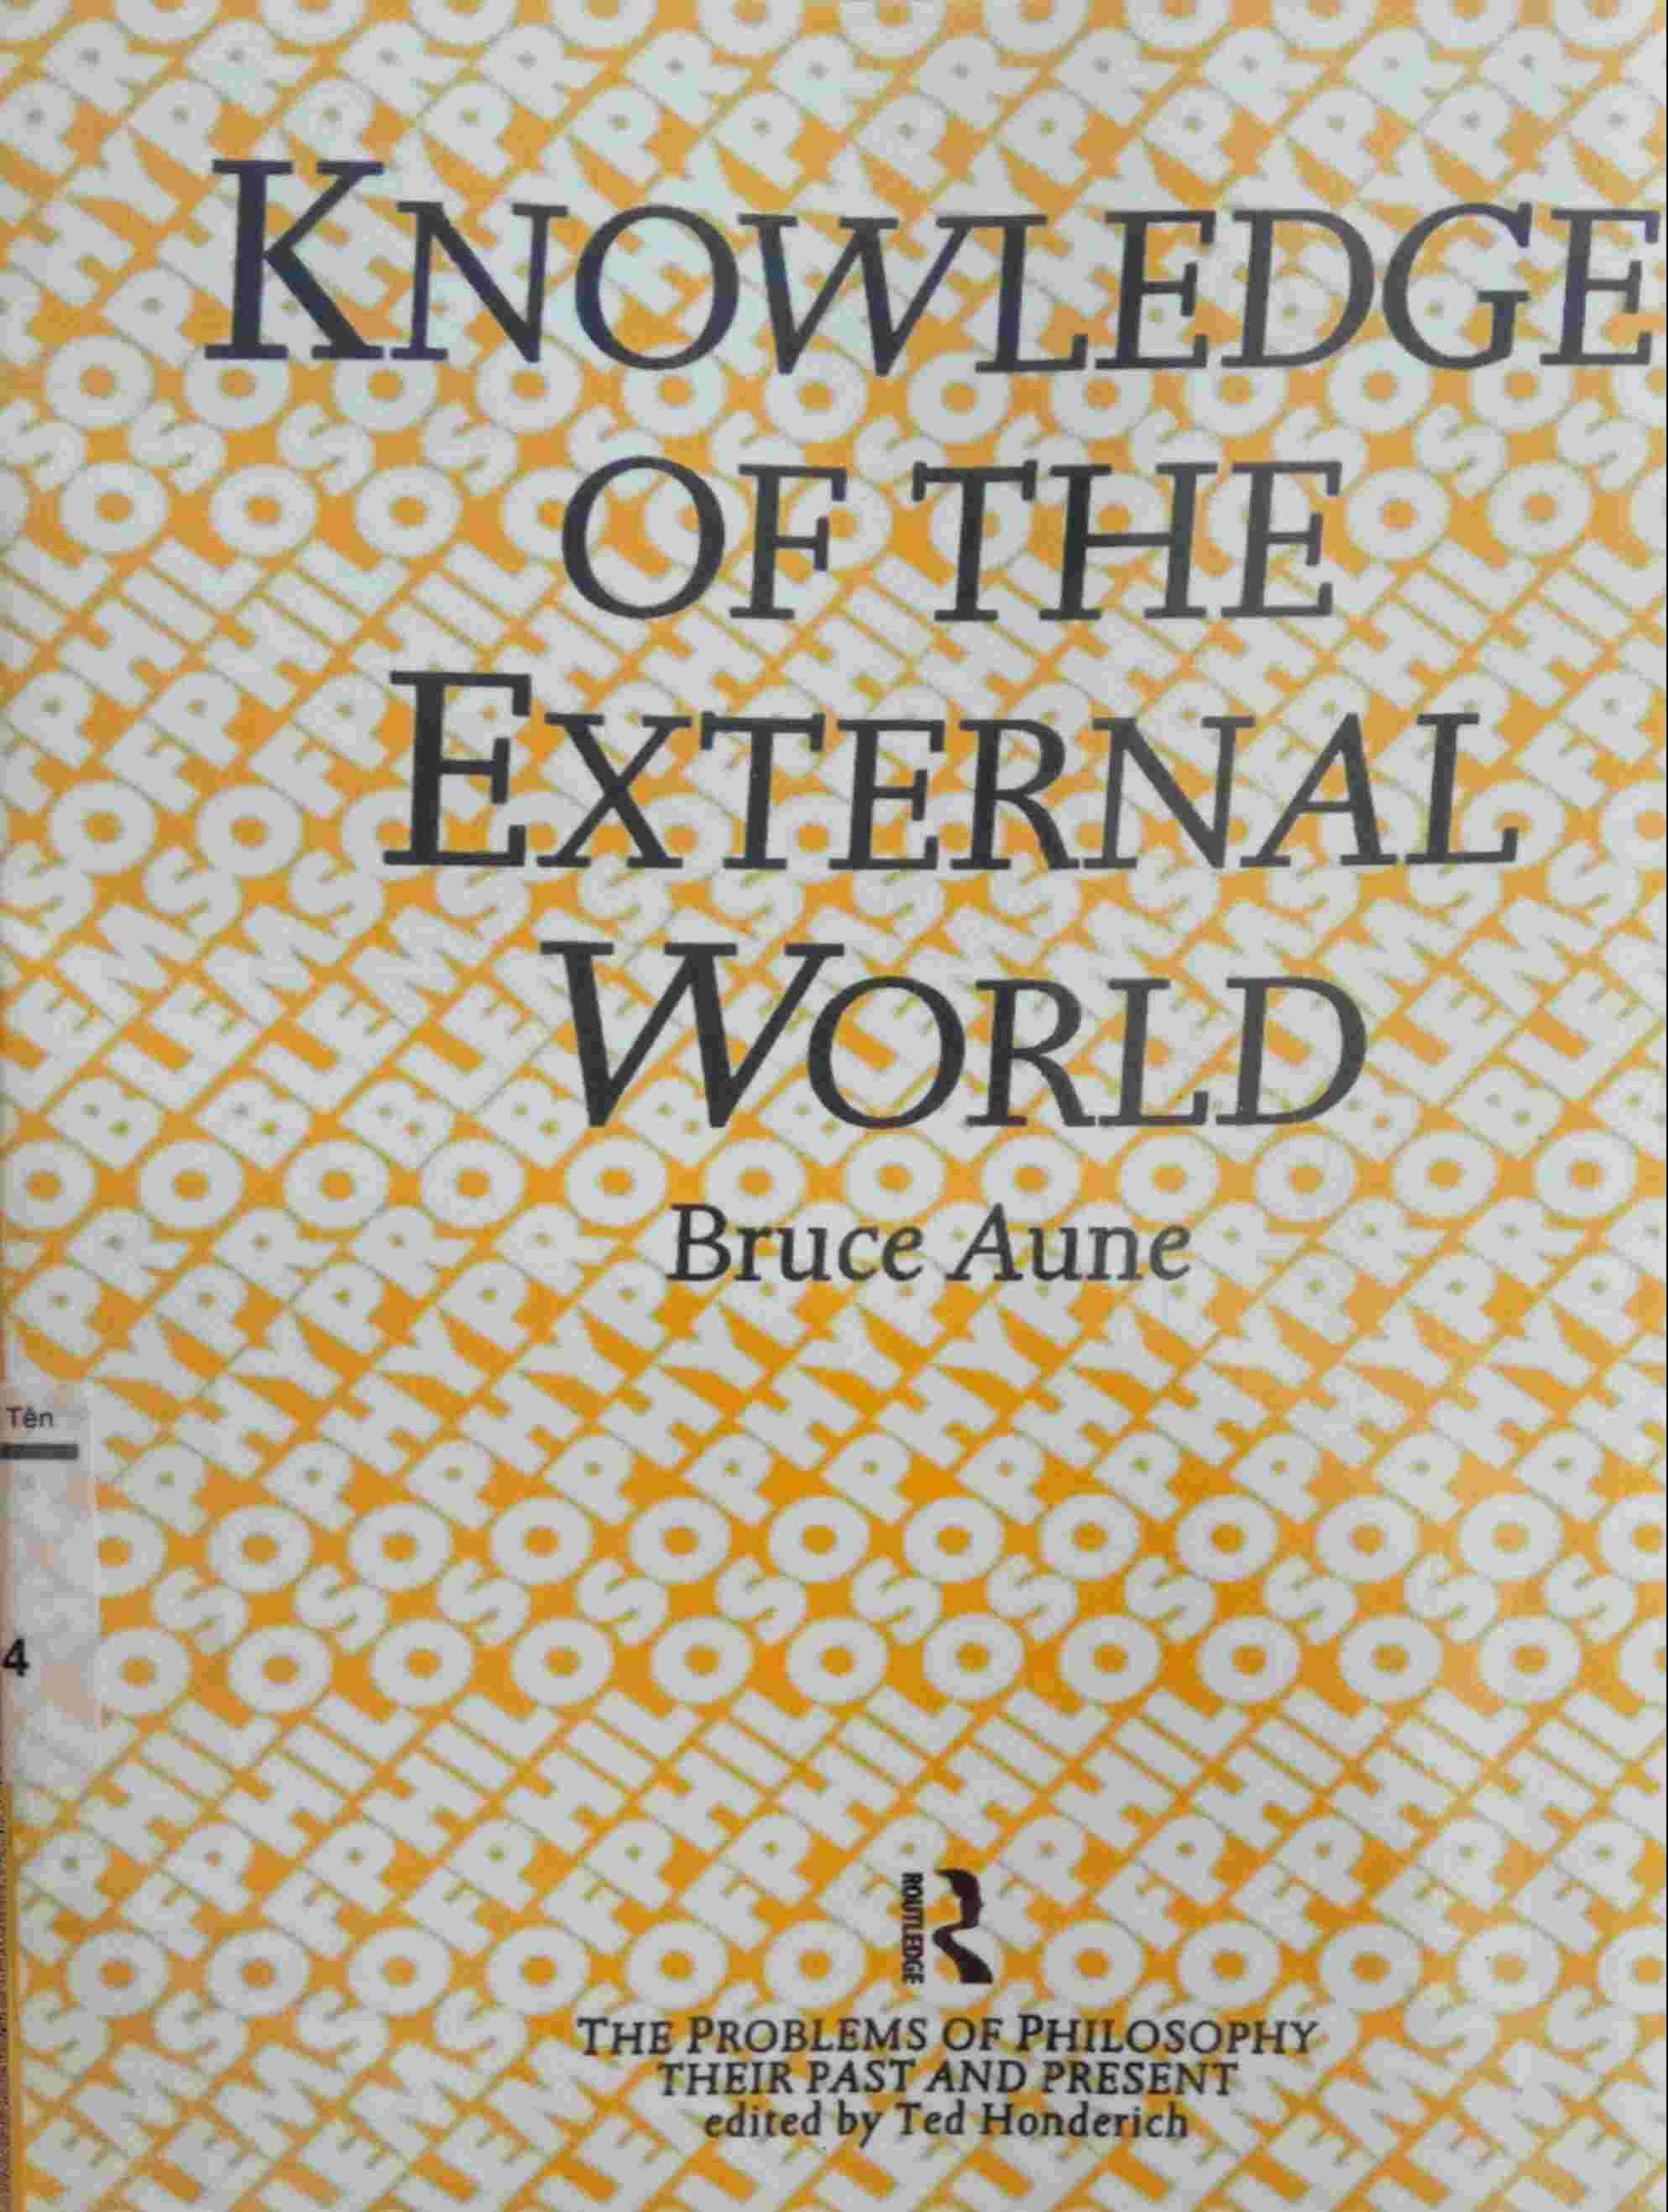 KNOWLEDGE OF THE EXTERNAL WORLD